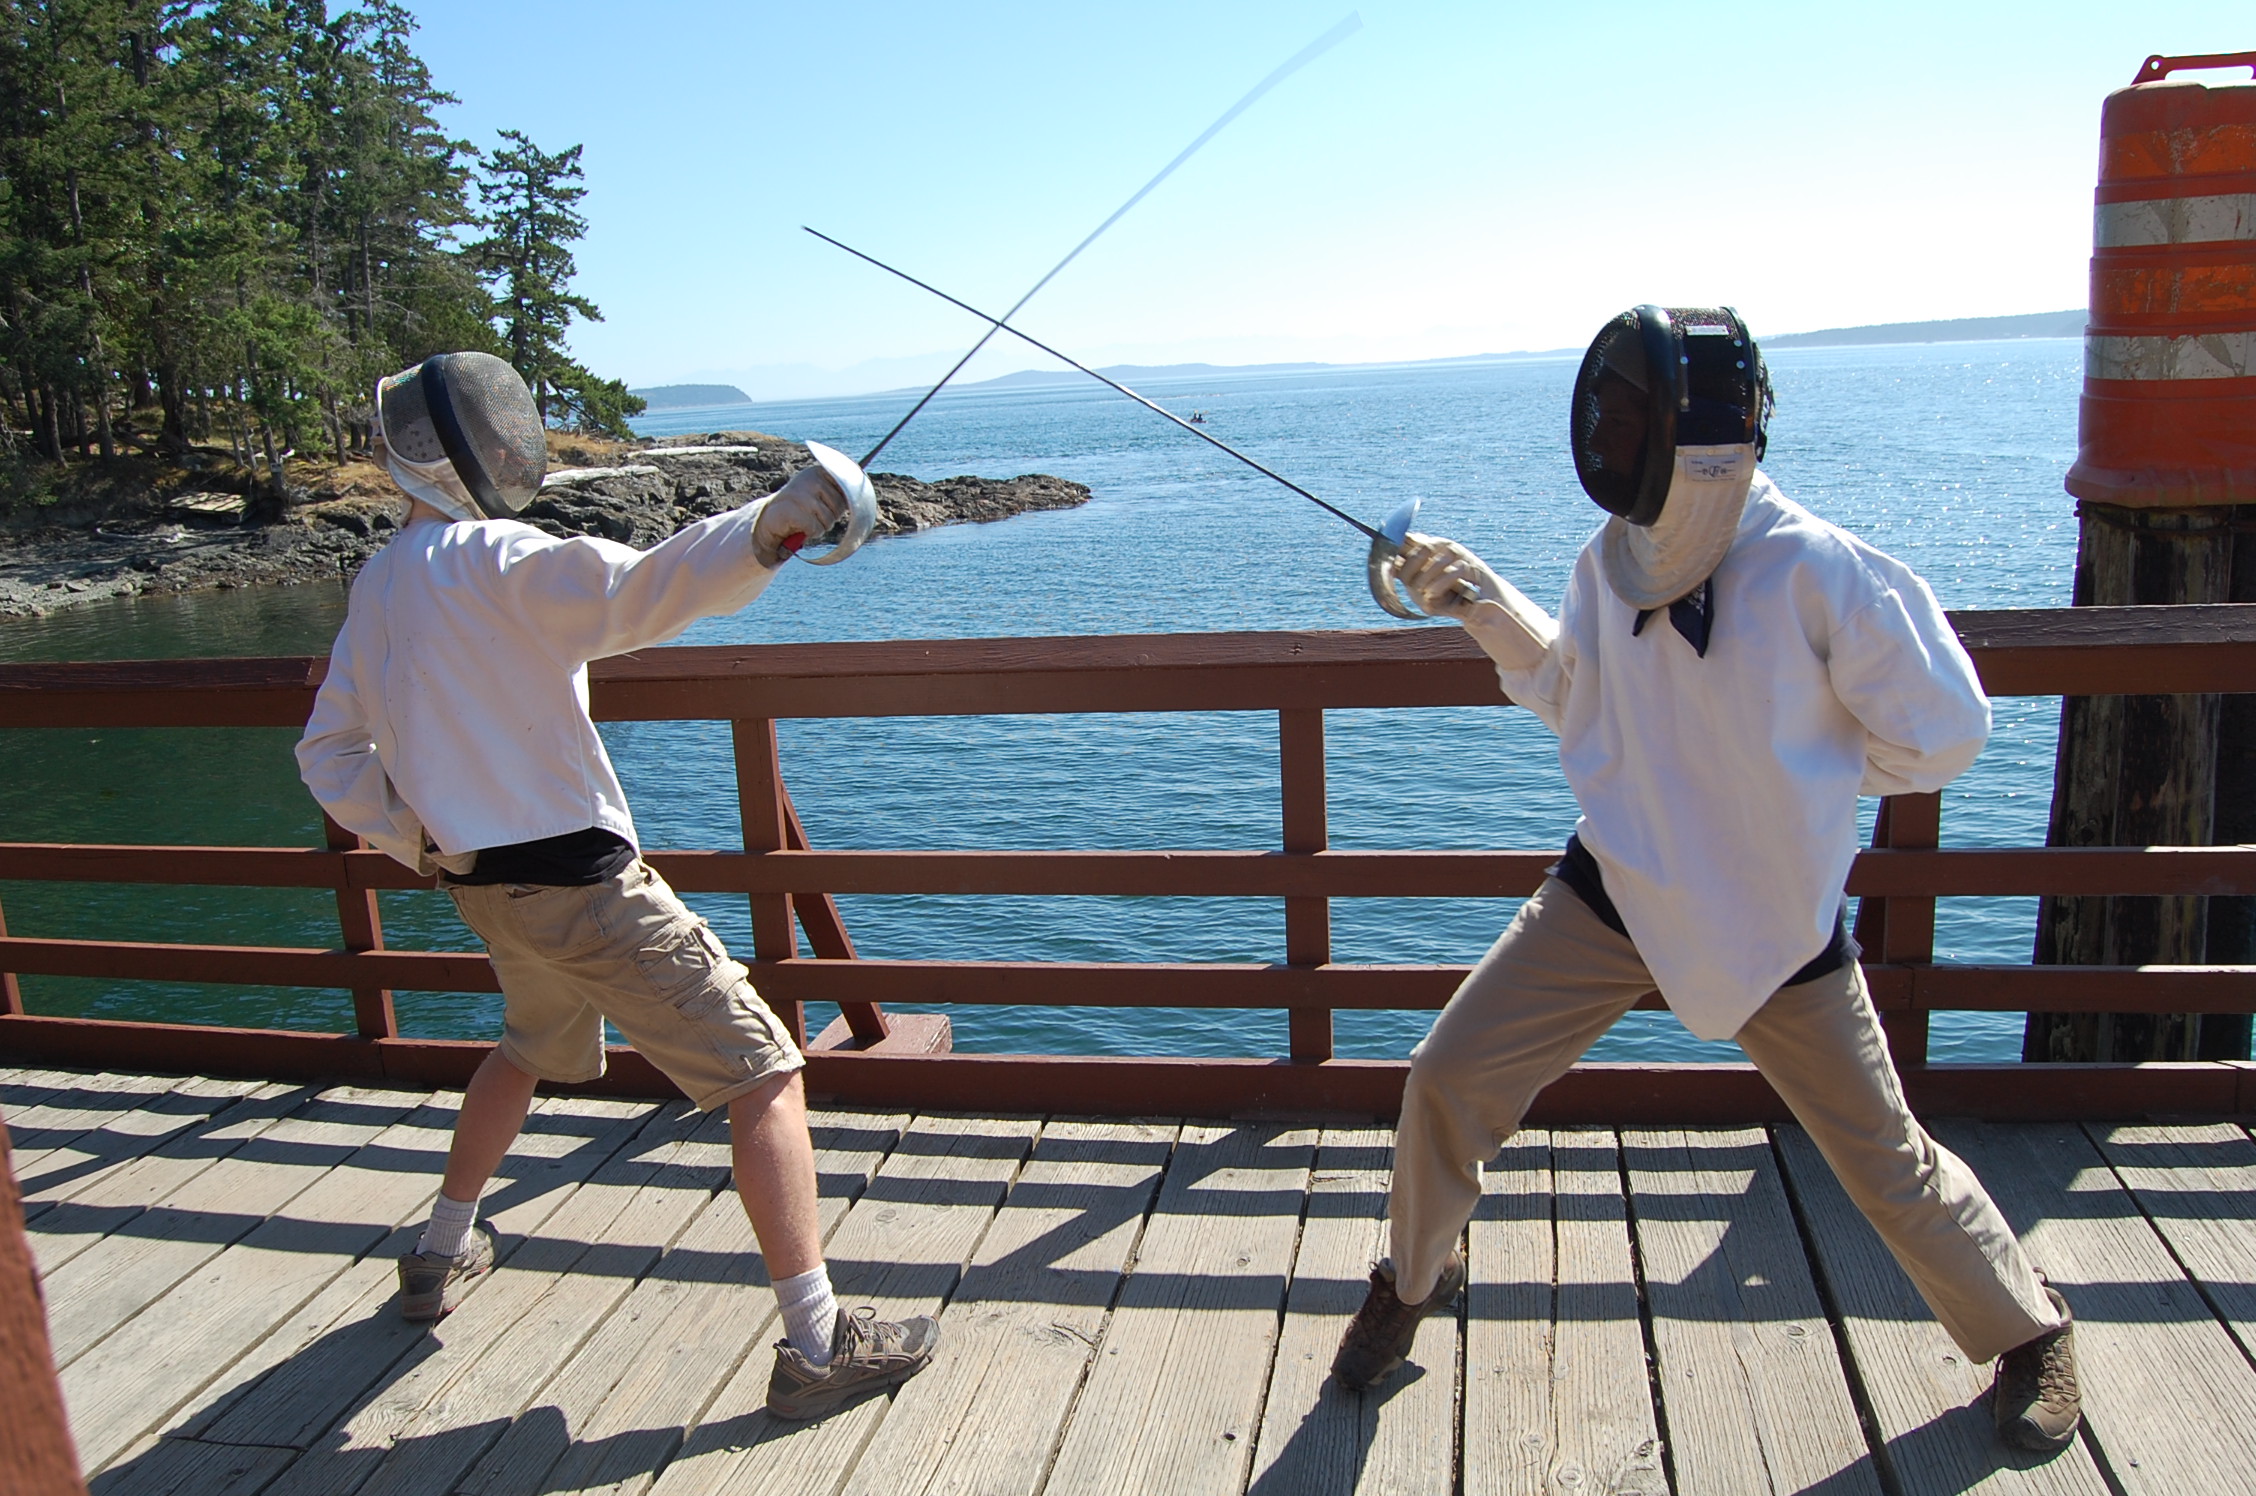 fencing at canoe island french camp